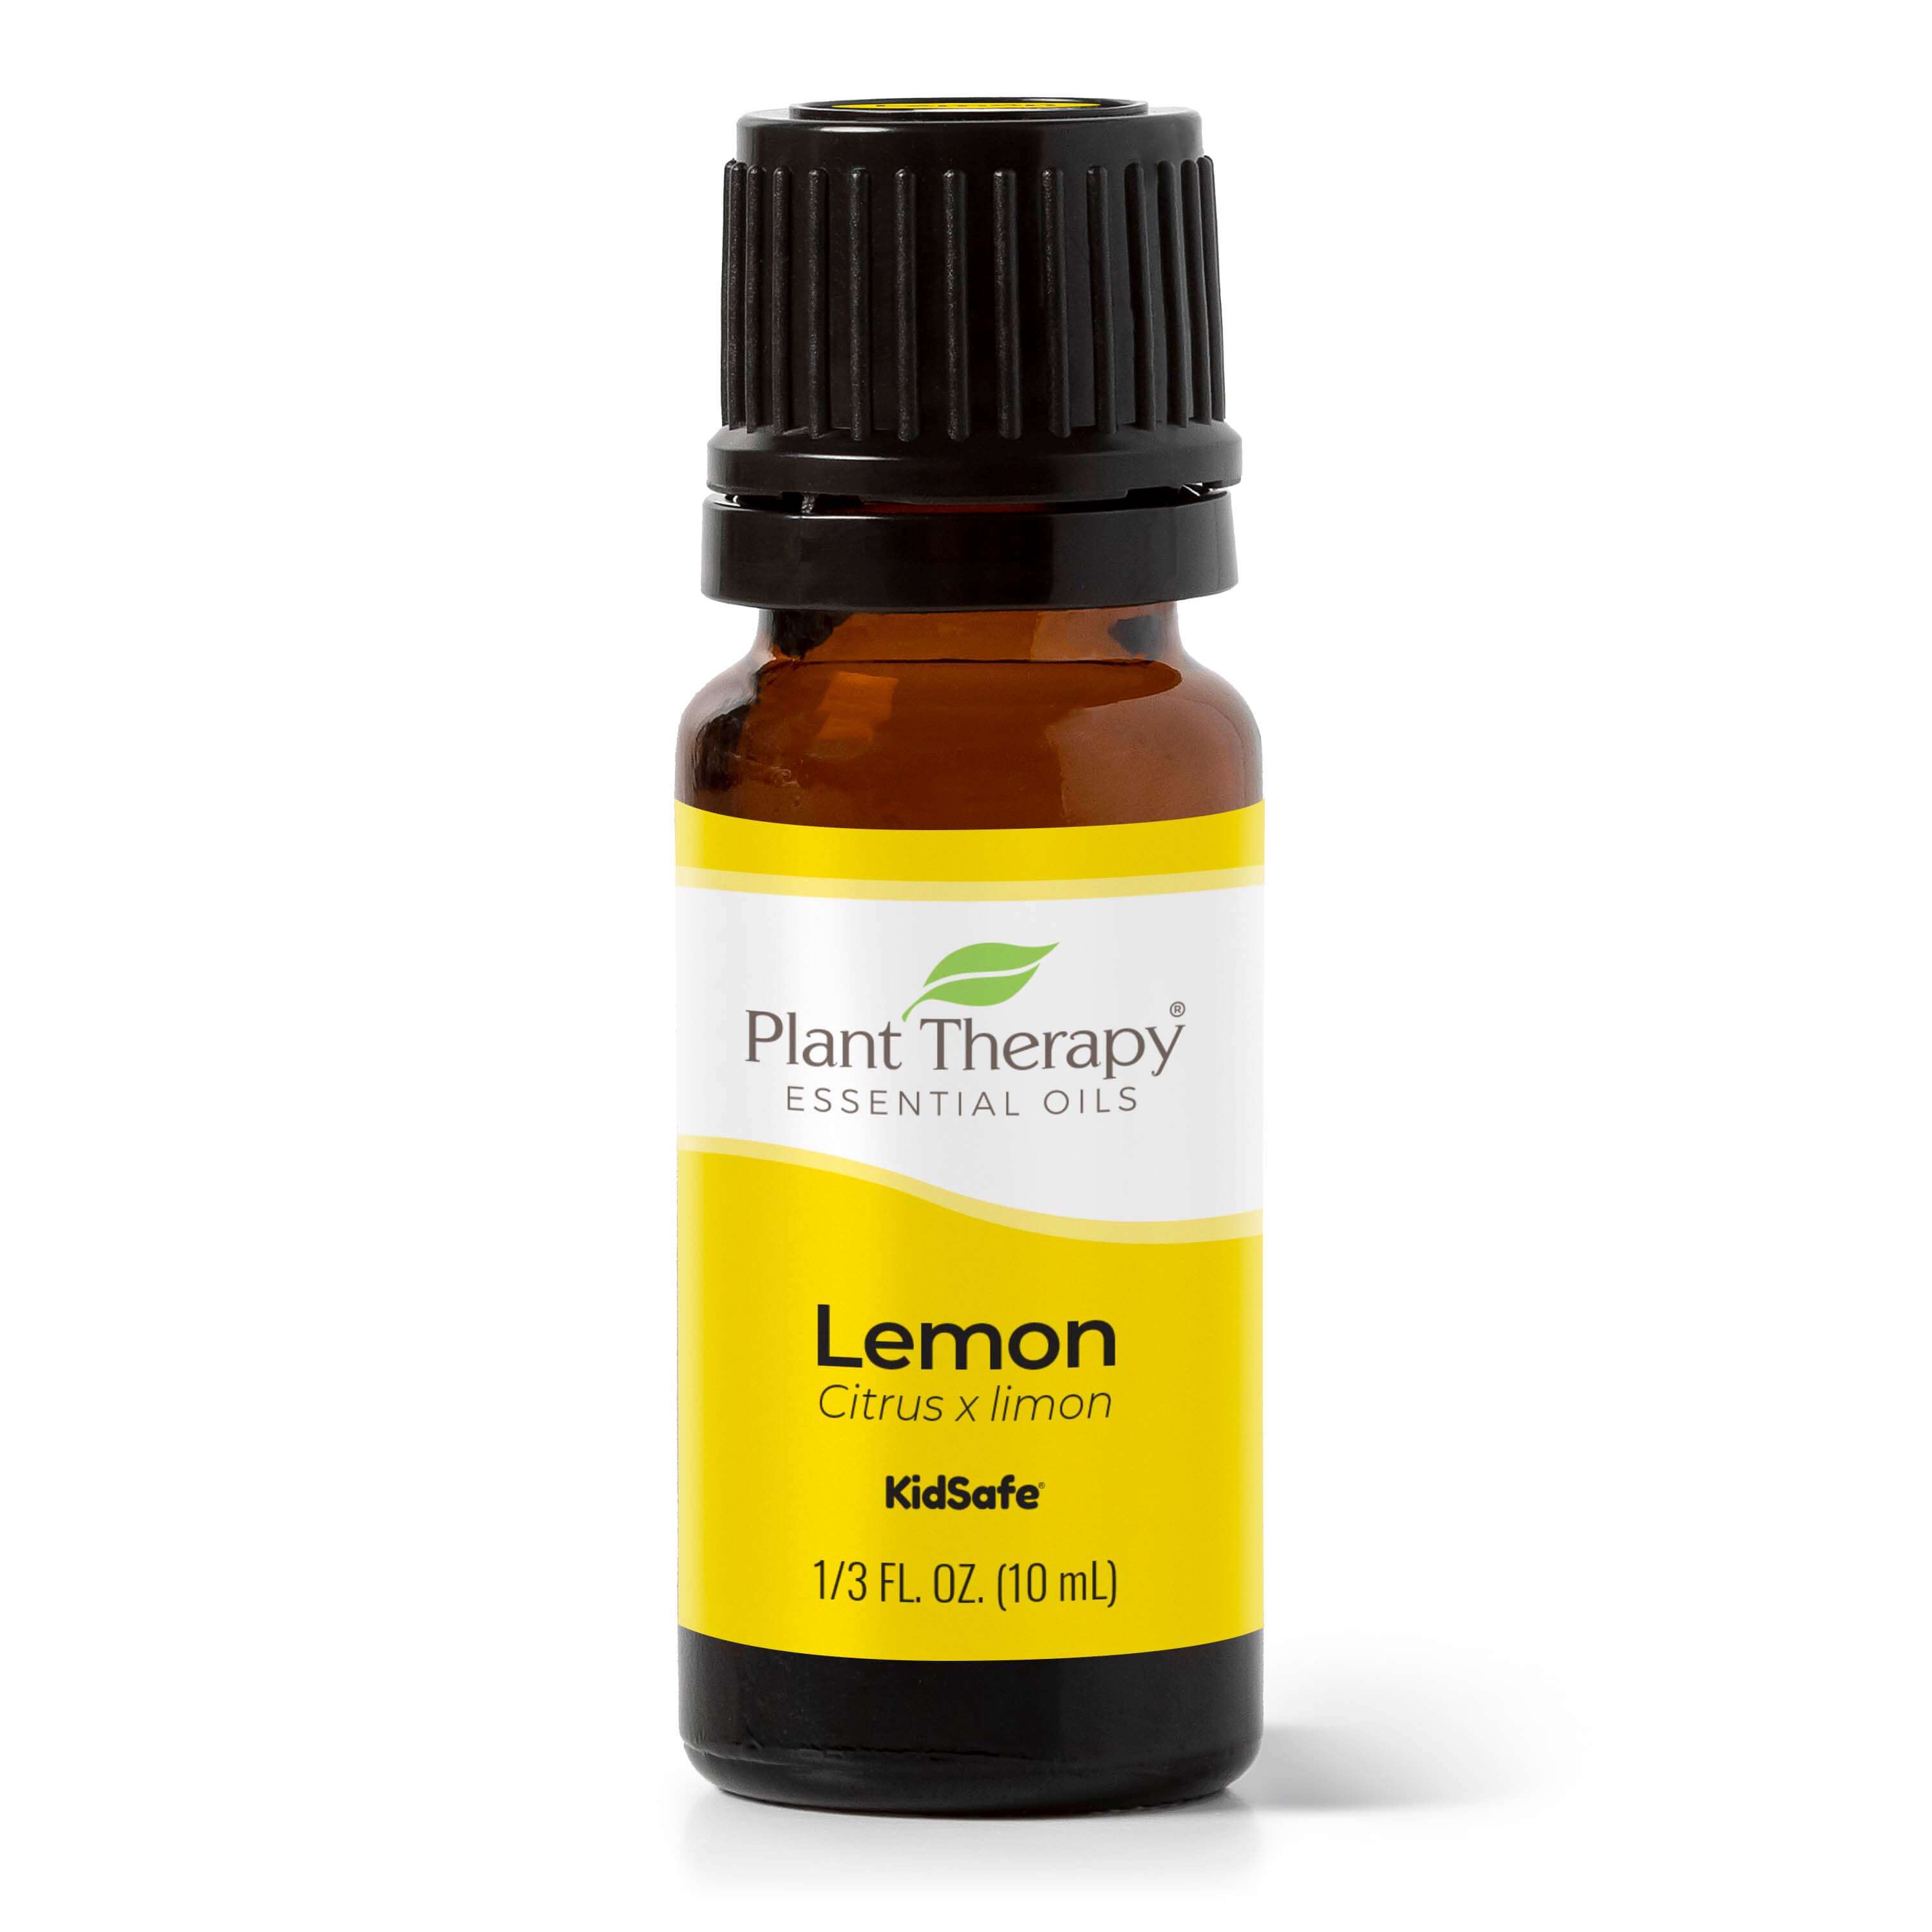 Lemon Oil 101: Nutrition, Benefits, How To Use, Buy, Store